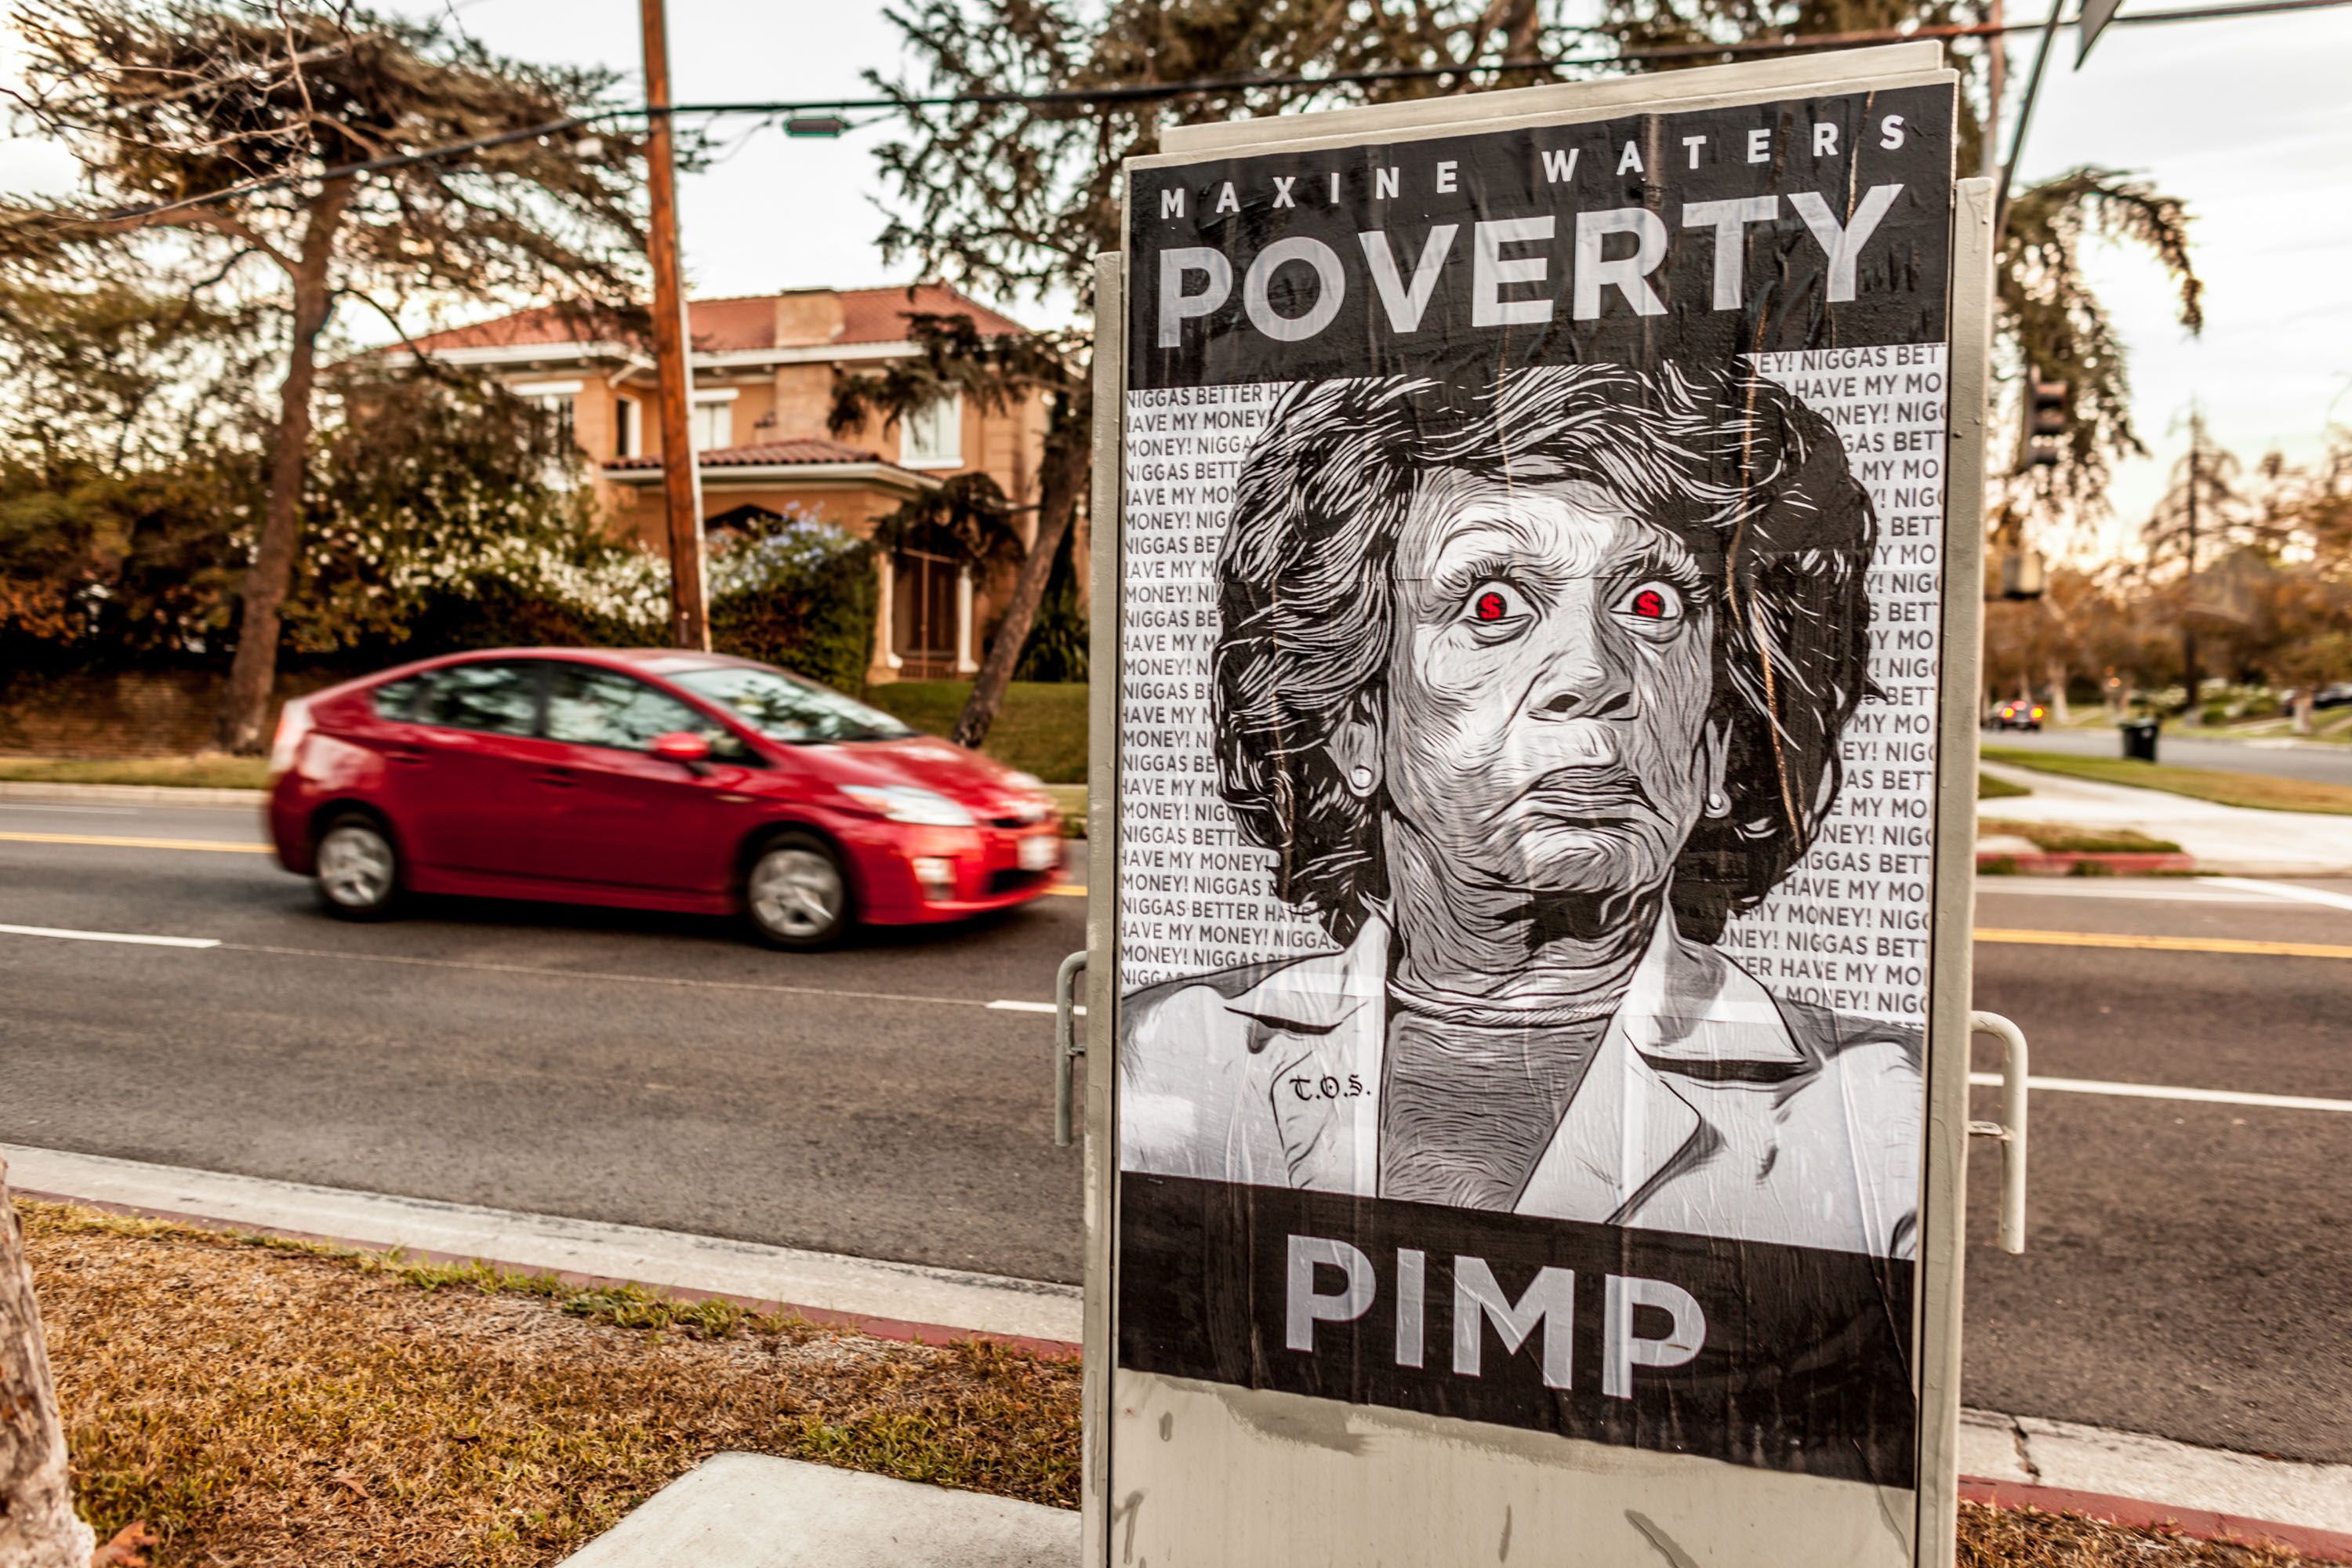 Maxine-Waters-Posters-in-front-of-her-Hancock-Park-Estate-01.jpg